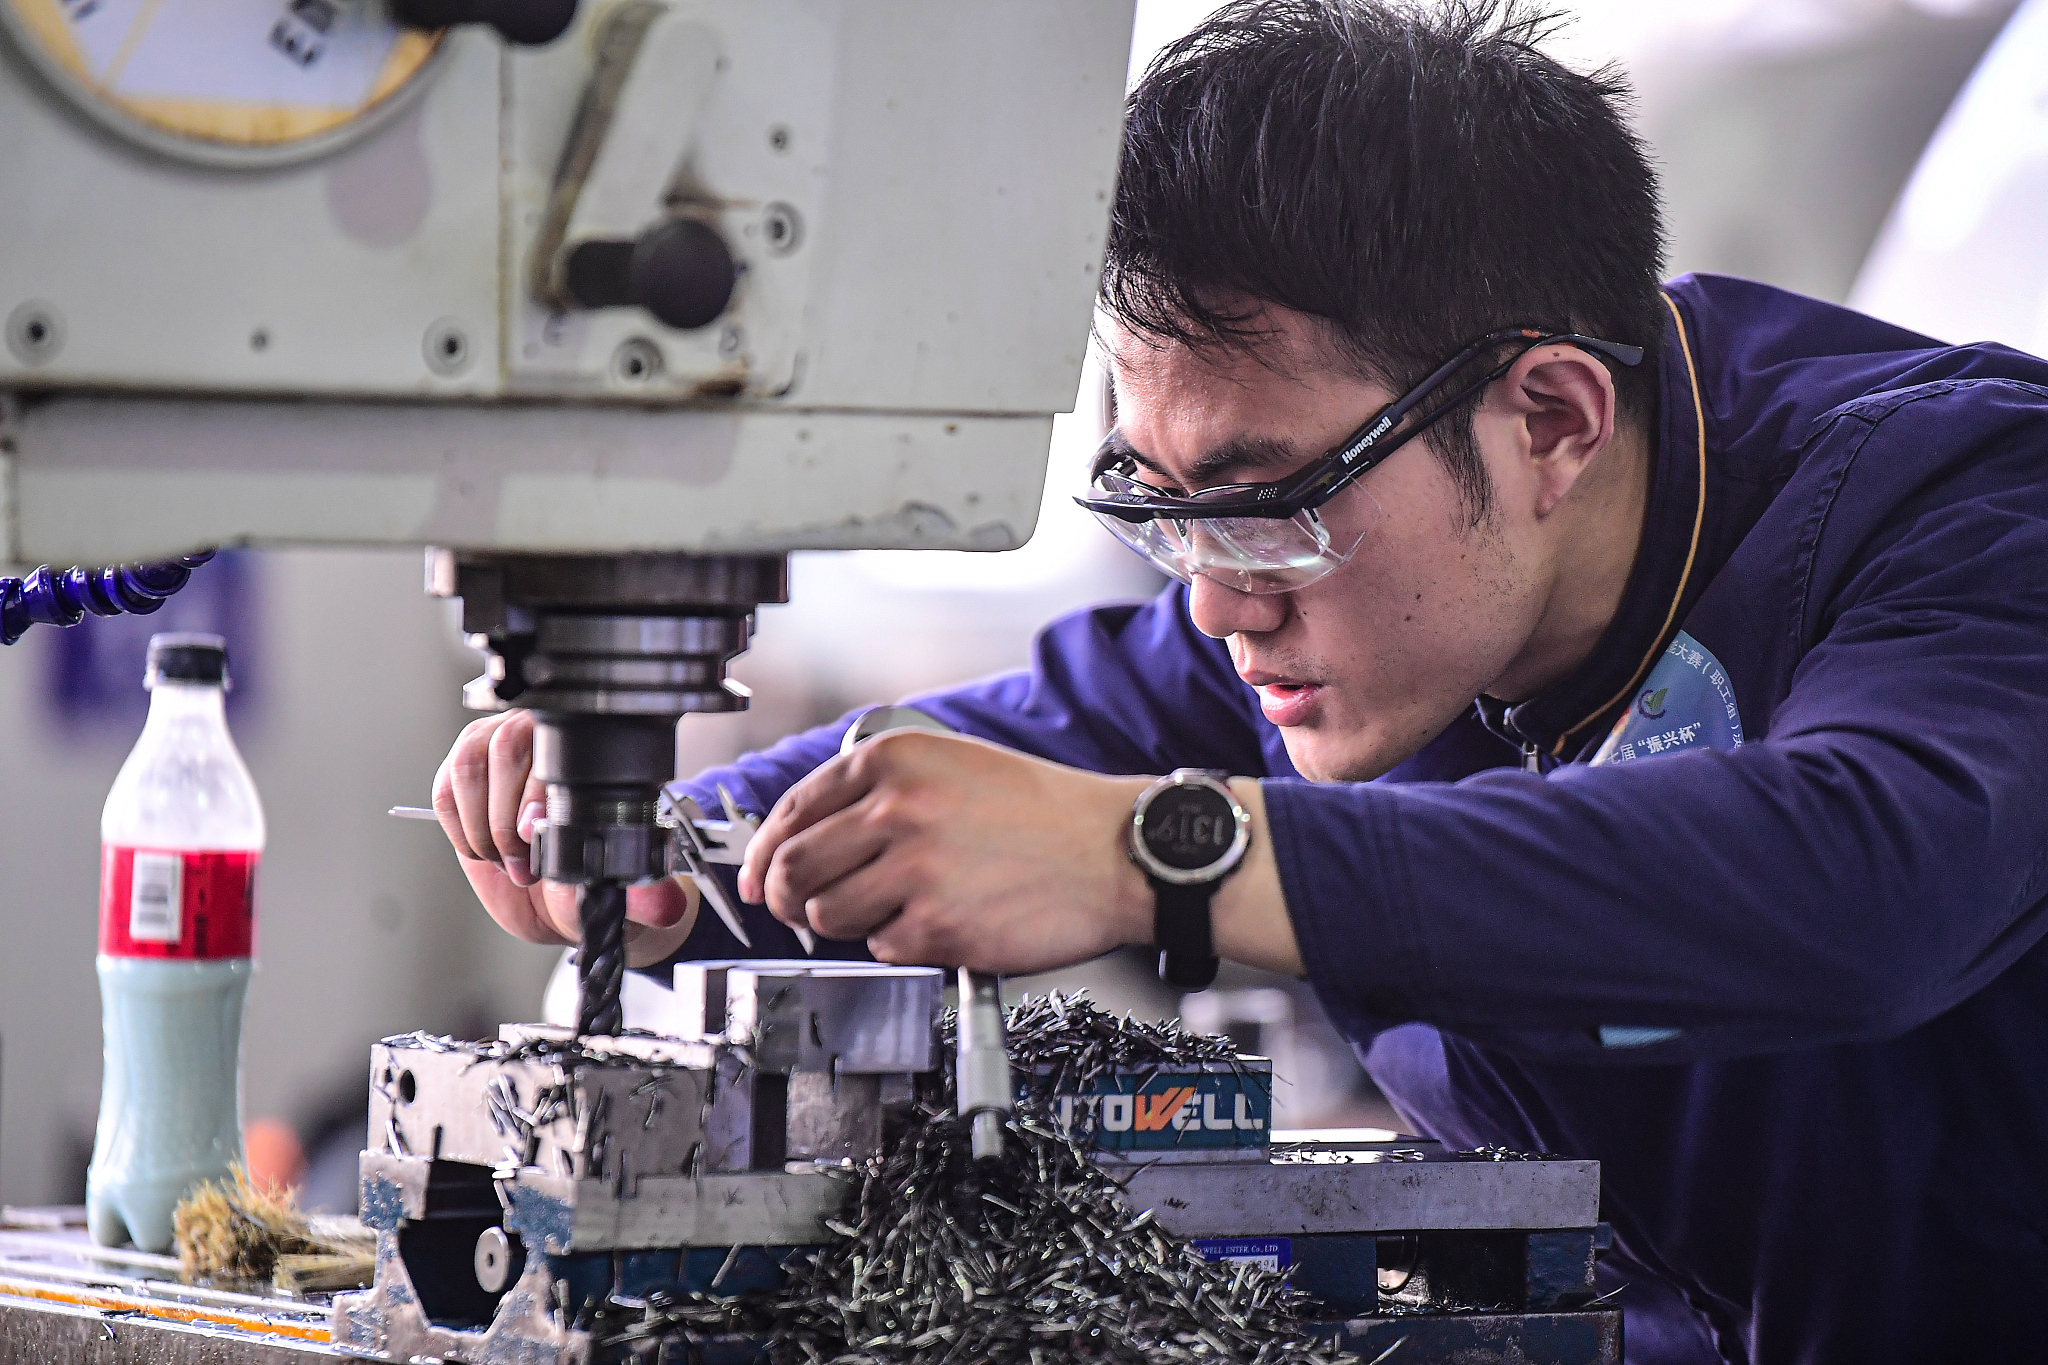 A file photo shows a participant engaging at a vocational skills competition in Shenyang, Liaoning Province. /CFP